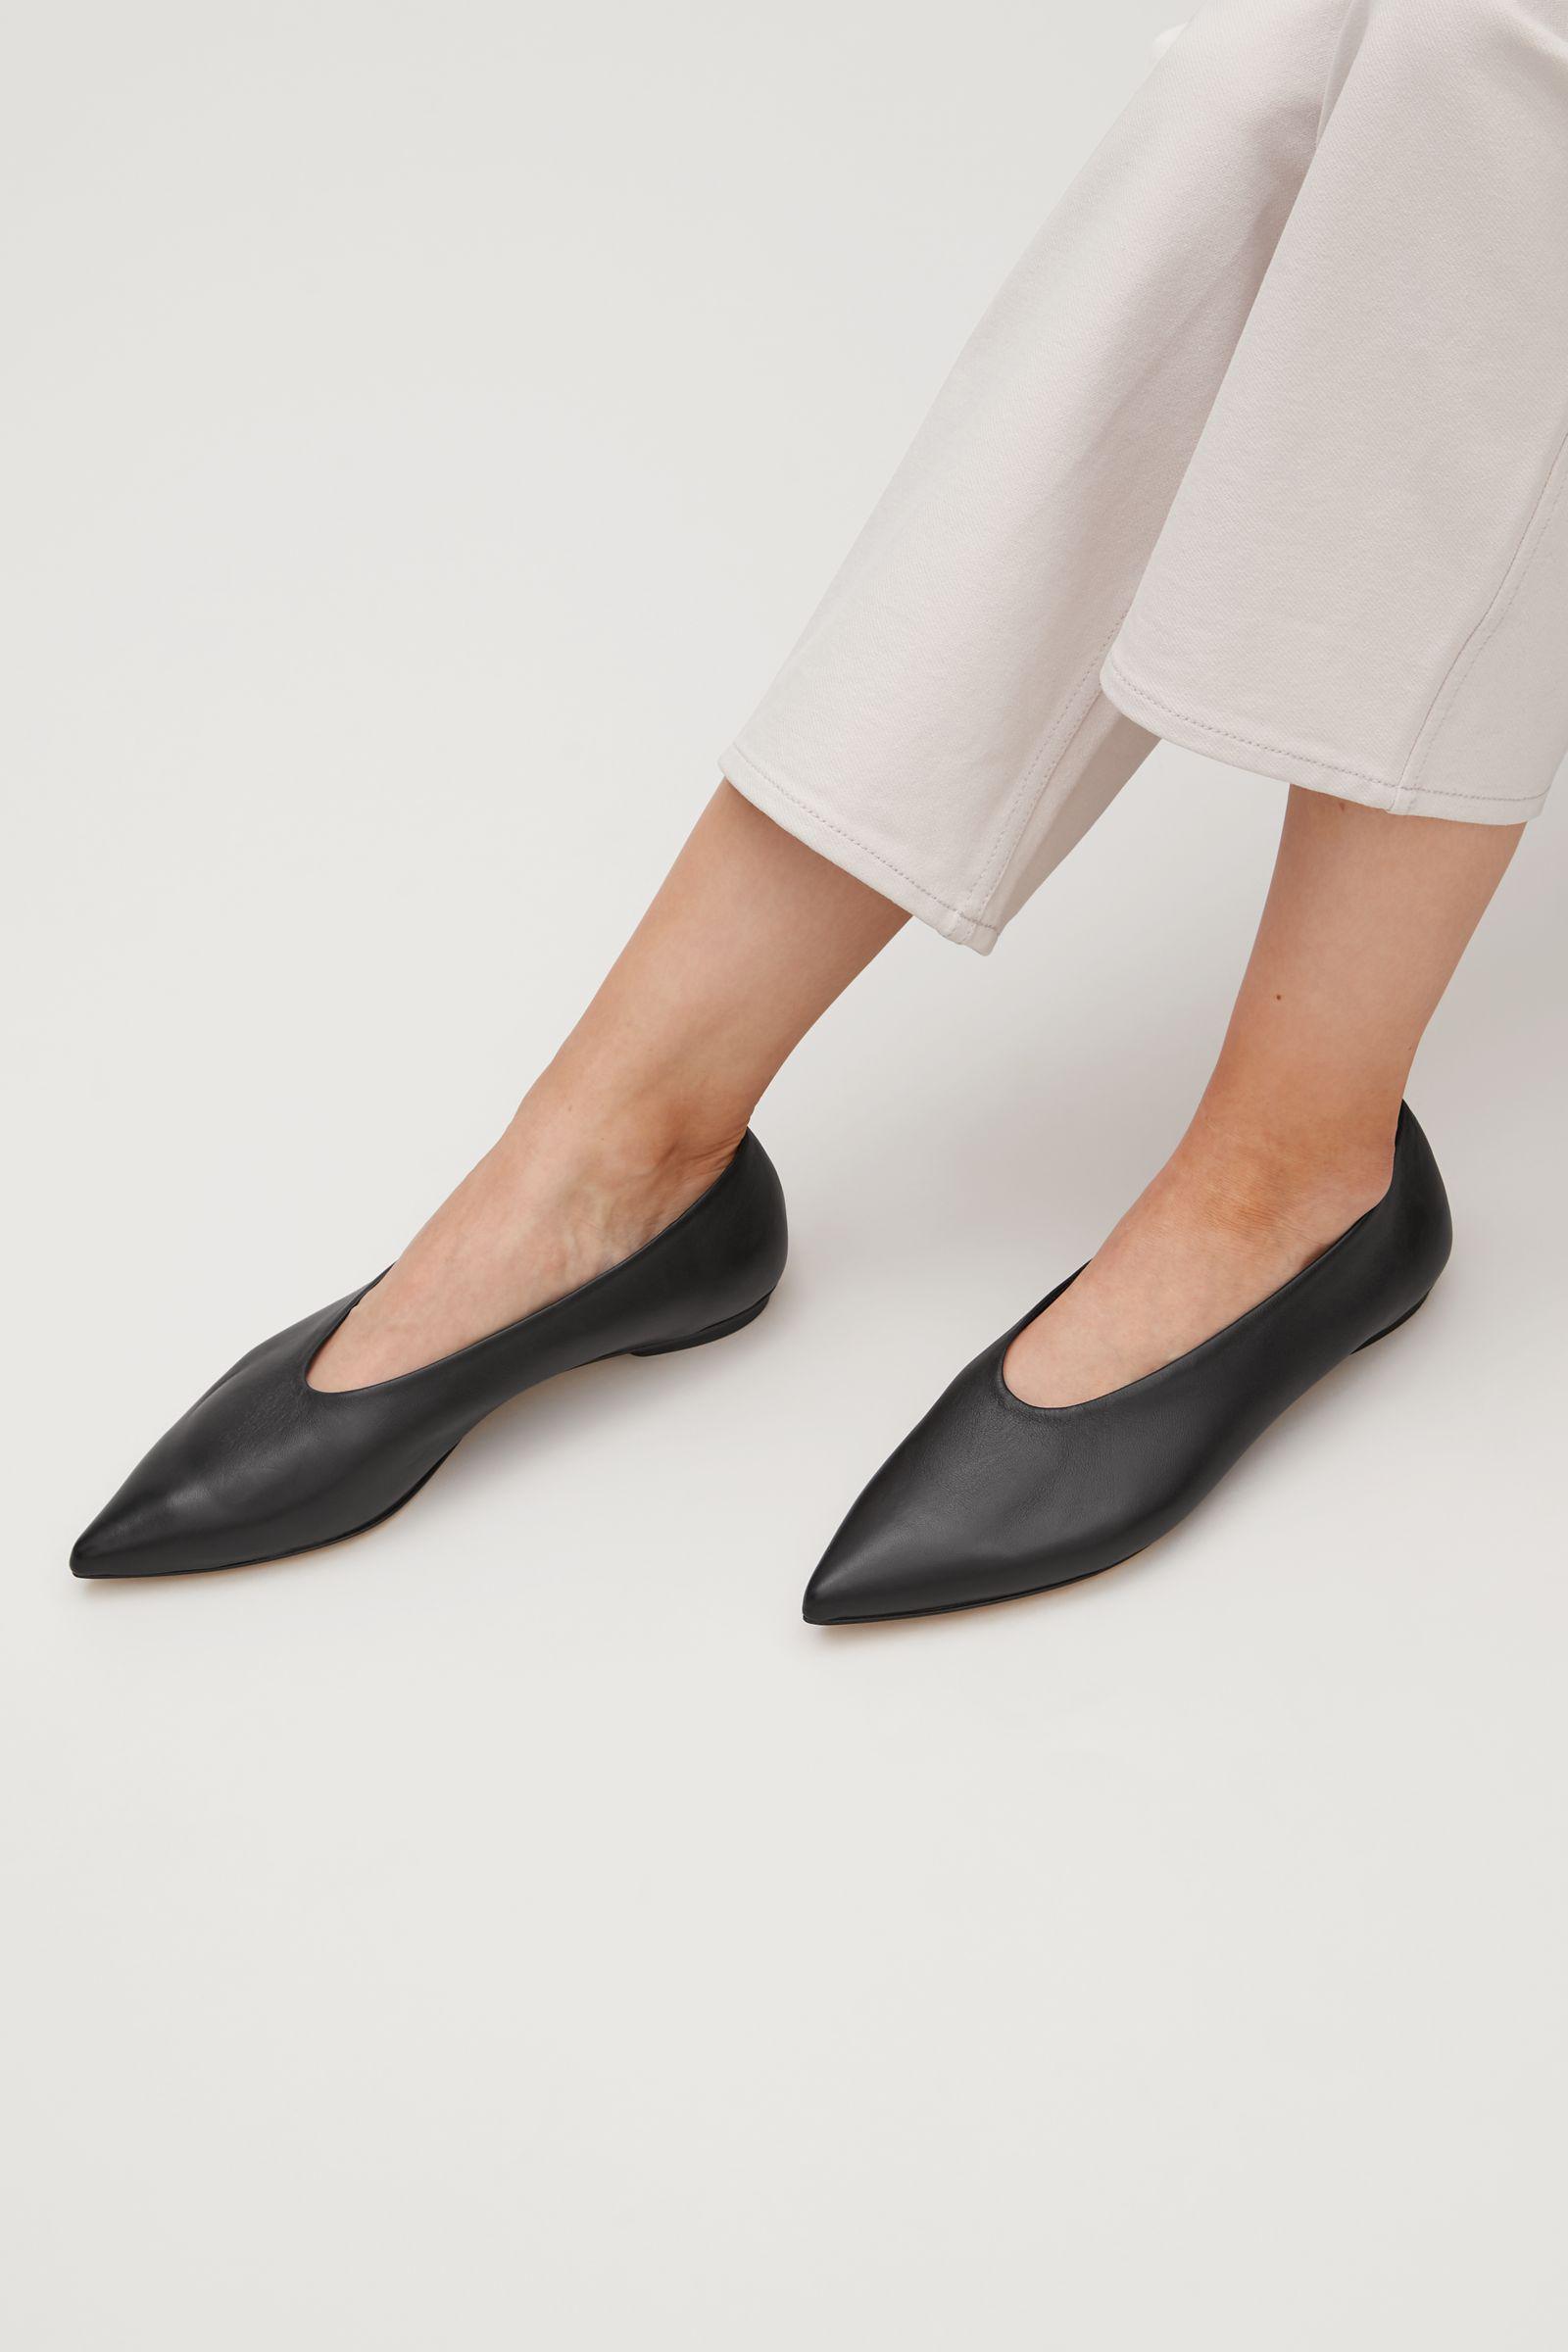 Buy > black pointed leather flats > in stock